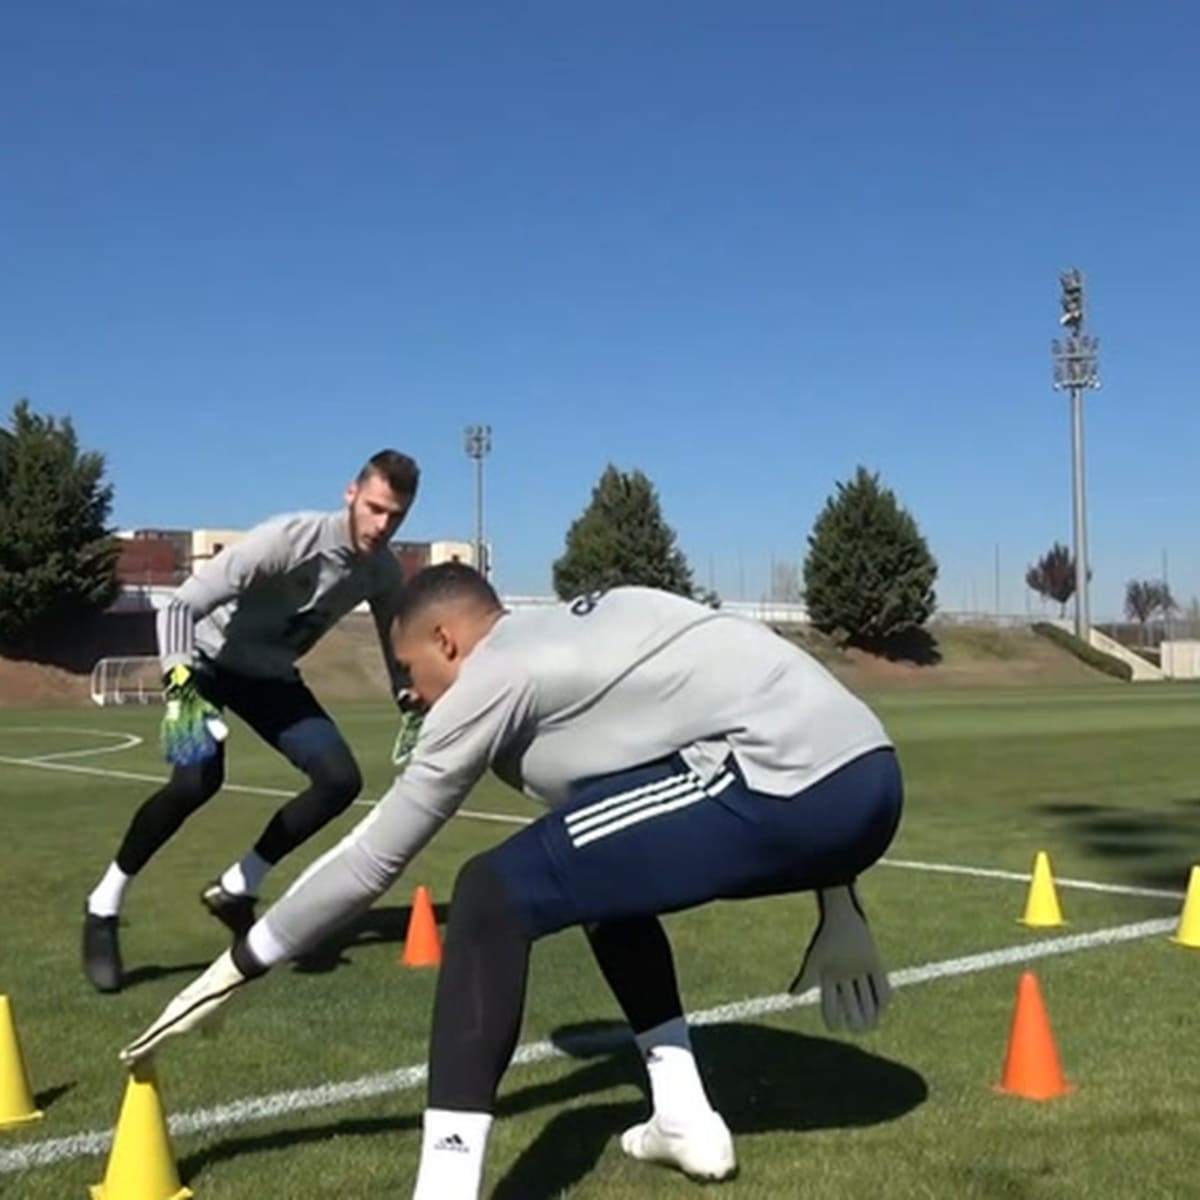 intense goalkeepers training Soccer - OneFootball Sports Illustrated